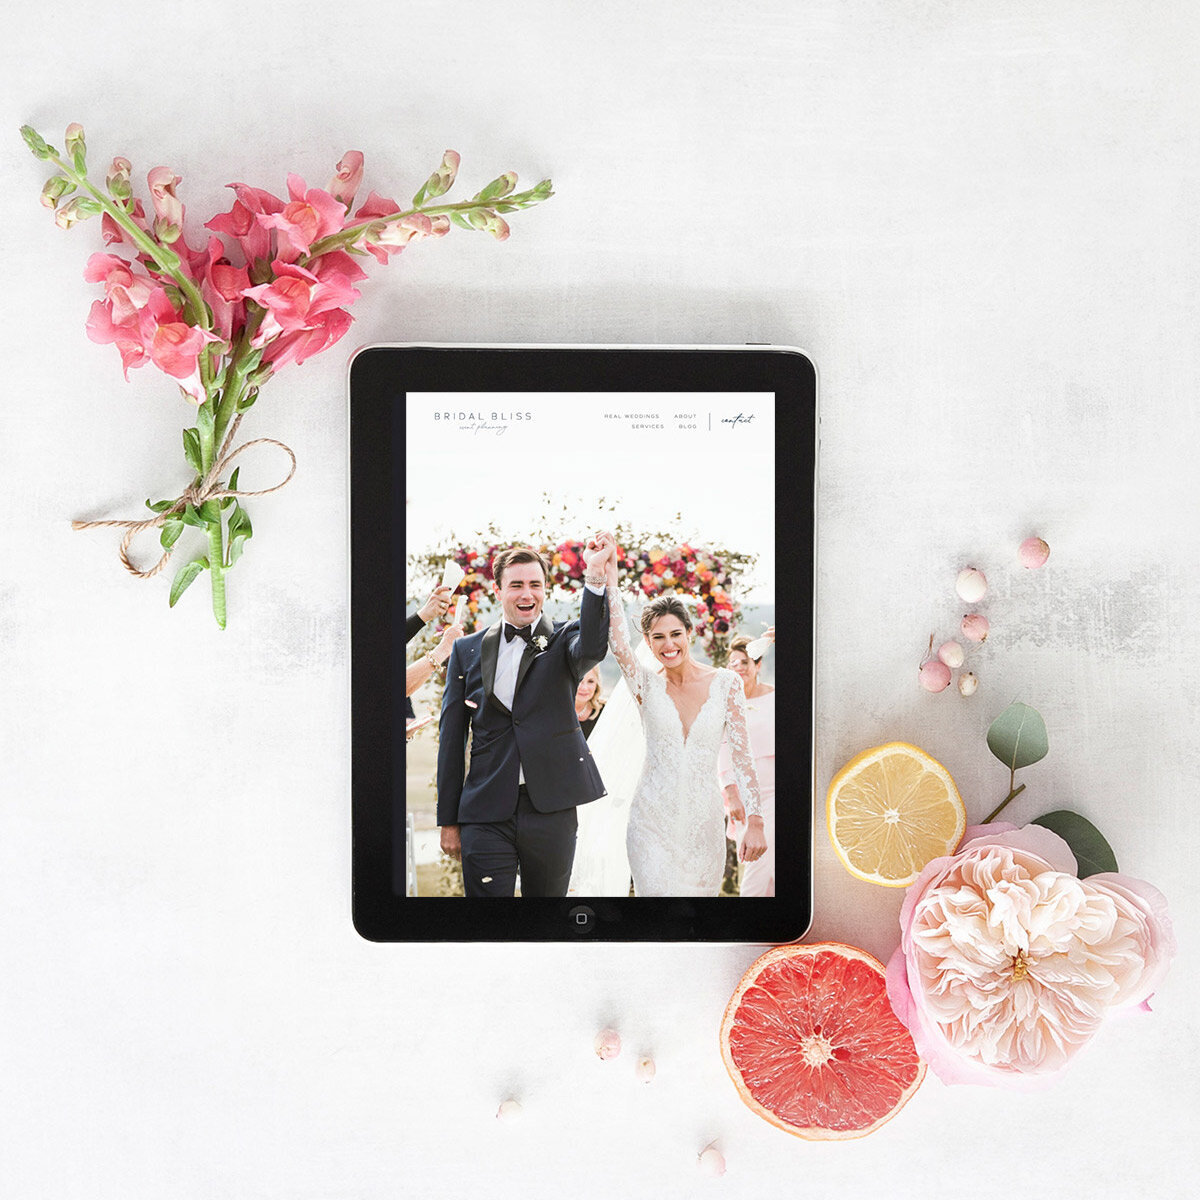 Bridal Bliss home page ipad with flowers square design by Jodi Neufeld Design.jpg